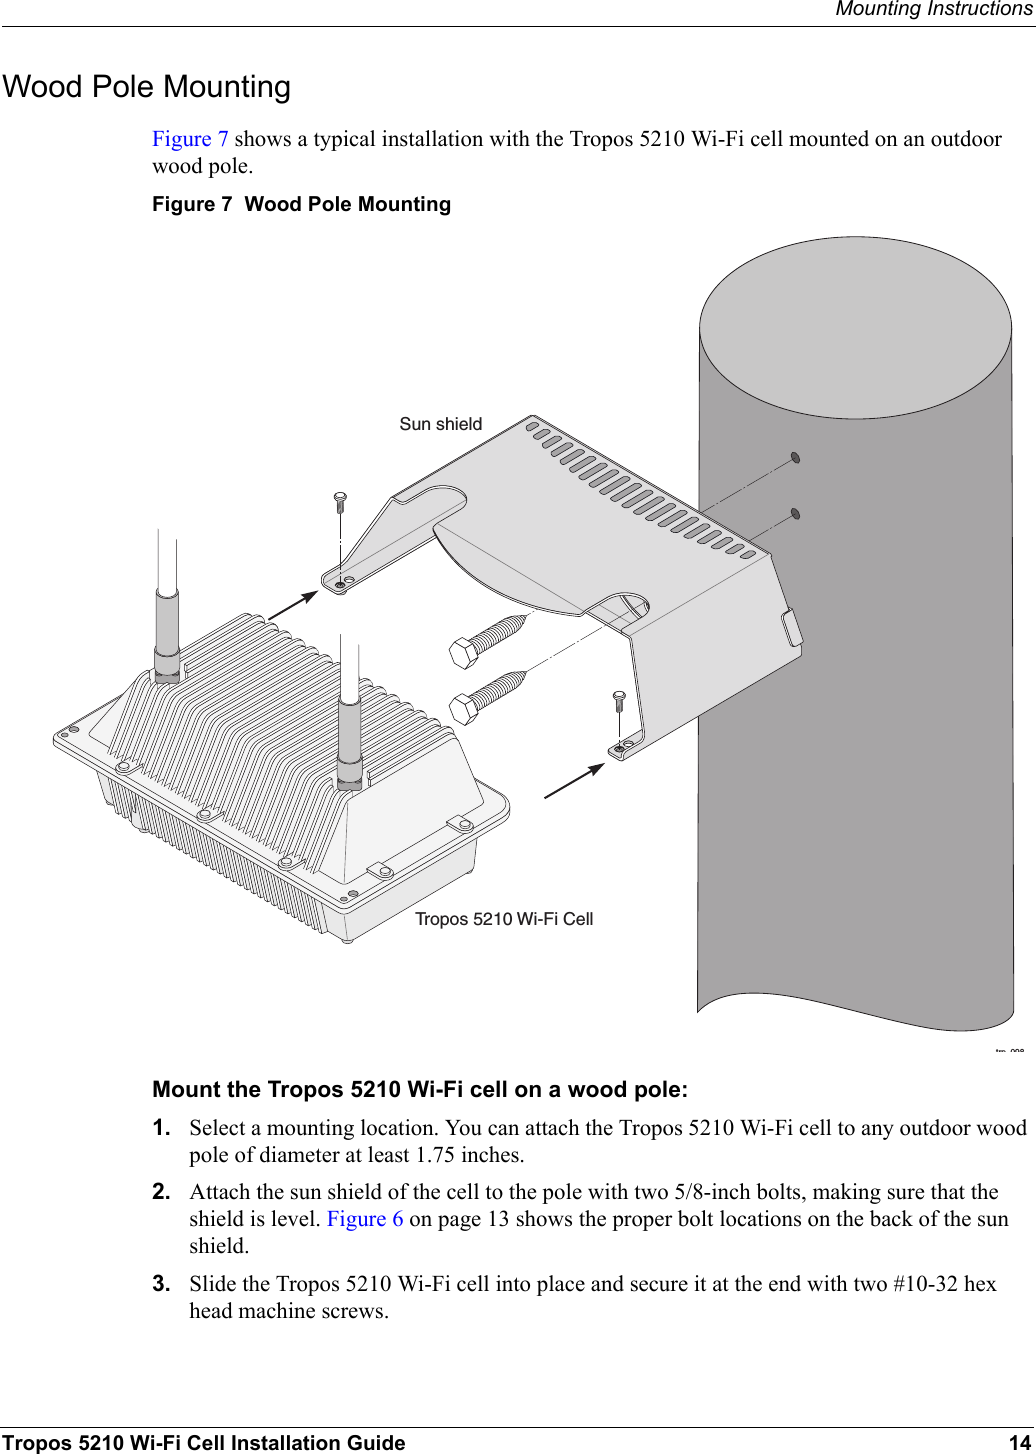 Mounting InstructionsTropos 5210 Wi-Fi Cell Installation Guide 14Wood Pole MountingFigure 7 shows a typical installation with the Tropos 5210 Wi-Fi cell mounted on an outdoor wood pole.Figure 7  Wood Pole MountingMount the Tropos 5210 Wi-Fi cell on a wood pole:1. Select a mounting location. You can attach the Tropos 5210 Wi-Fi cell to any outdoor wood pole of diameter at least 1.75 inches.2. Attach the sun shield of the cell to the pole with two 5/8-inch bolts, making sure that the shield is level. Figure 6 on page 13 shows the proper bolt locations on the back of the sun shield.3. Slide the Tropos 5210 Wi-Fi cell into place and secure it at the end with two #10-32 hex head machine screws.trp 098Tropos 5210 Wi-Fi CellSun shield